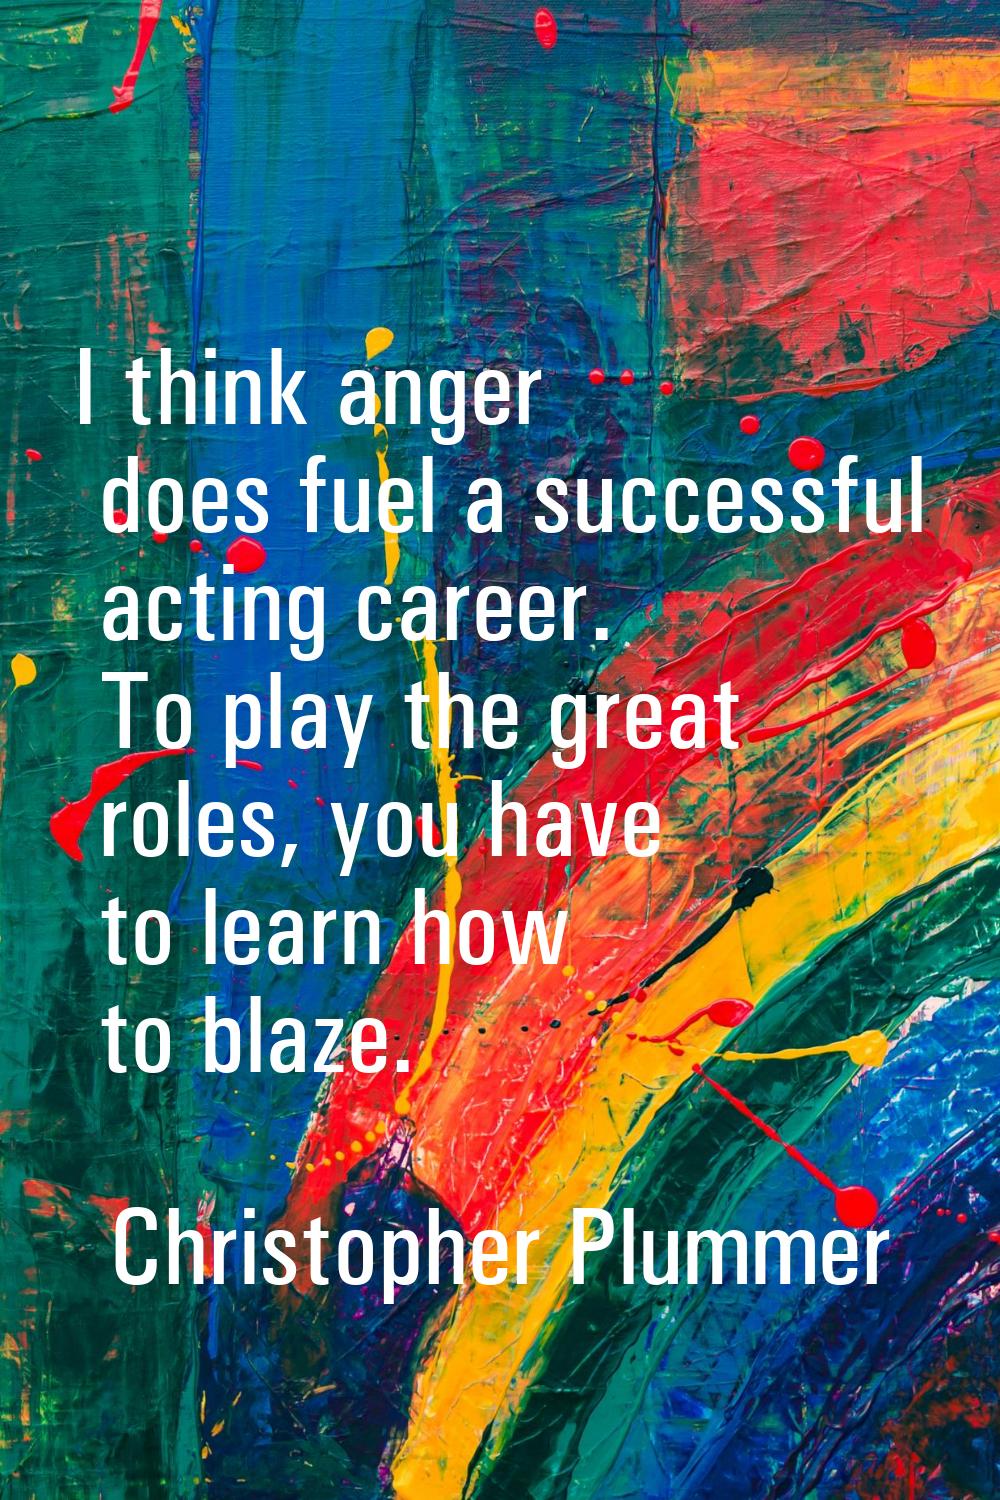 I think anger does fuel a successful acting career. To play the great roles, you have to learn how 